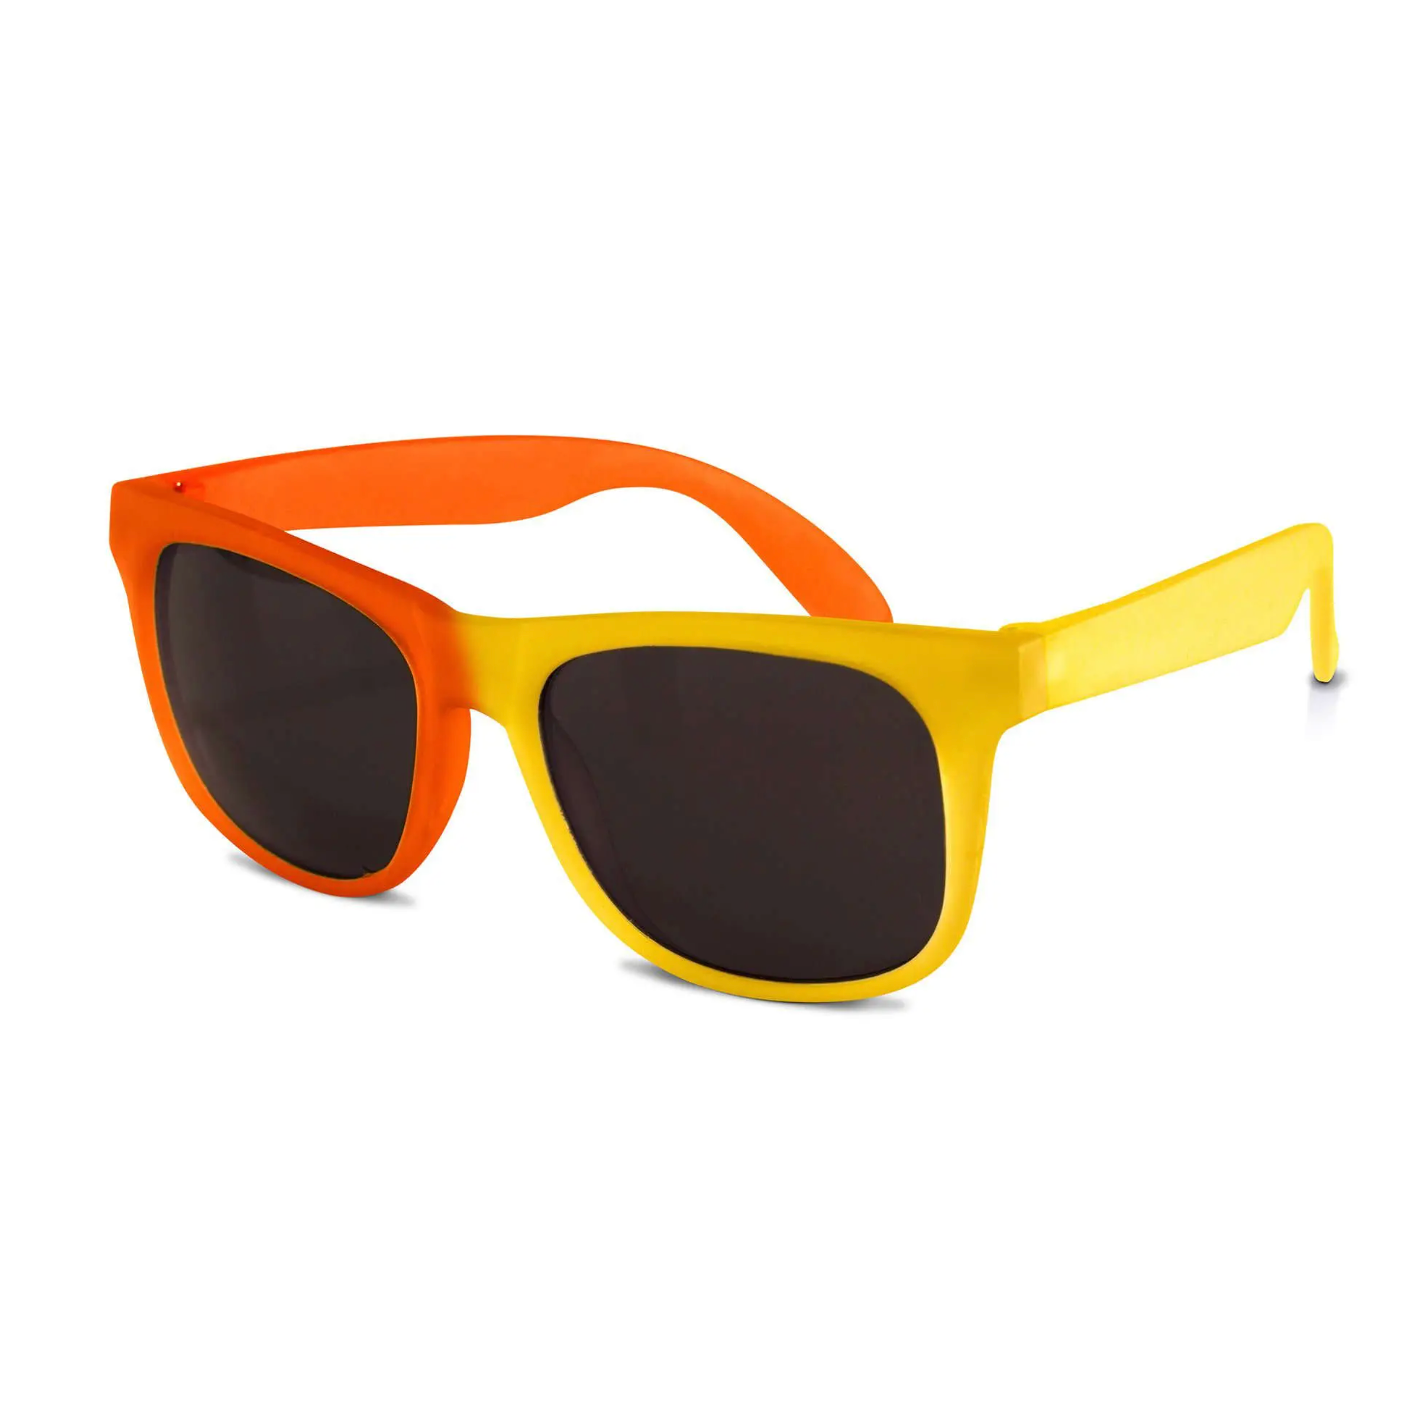 Real Shades Switch Sunglasses for Youth - Ages 7+, color Changing Frames, Unbreakable, 100% UVA UVB Protection